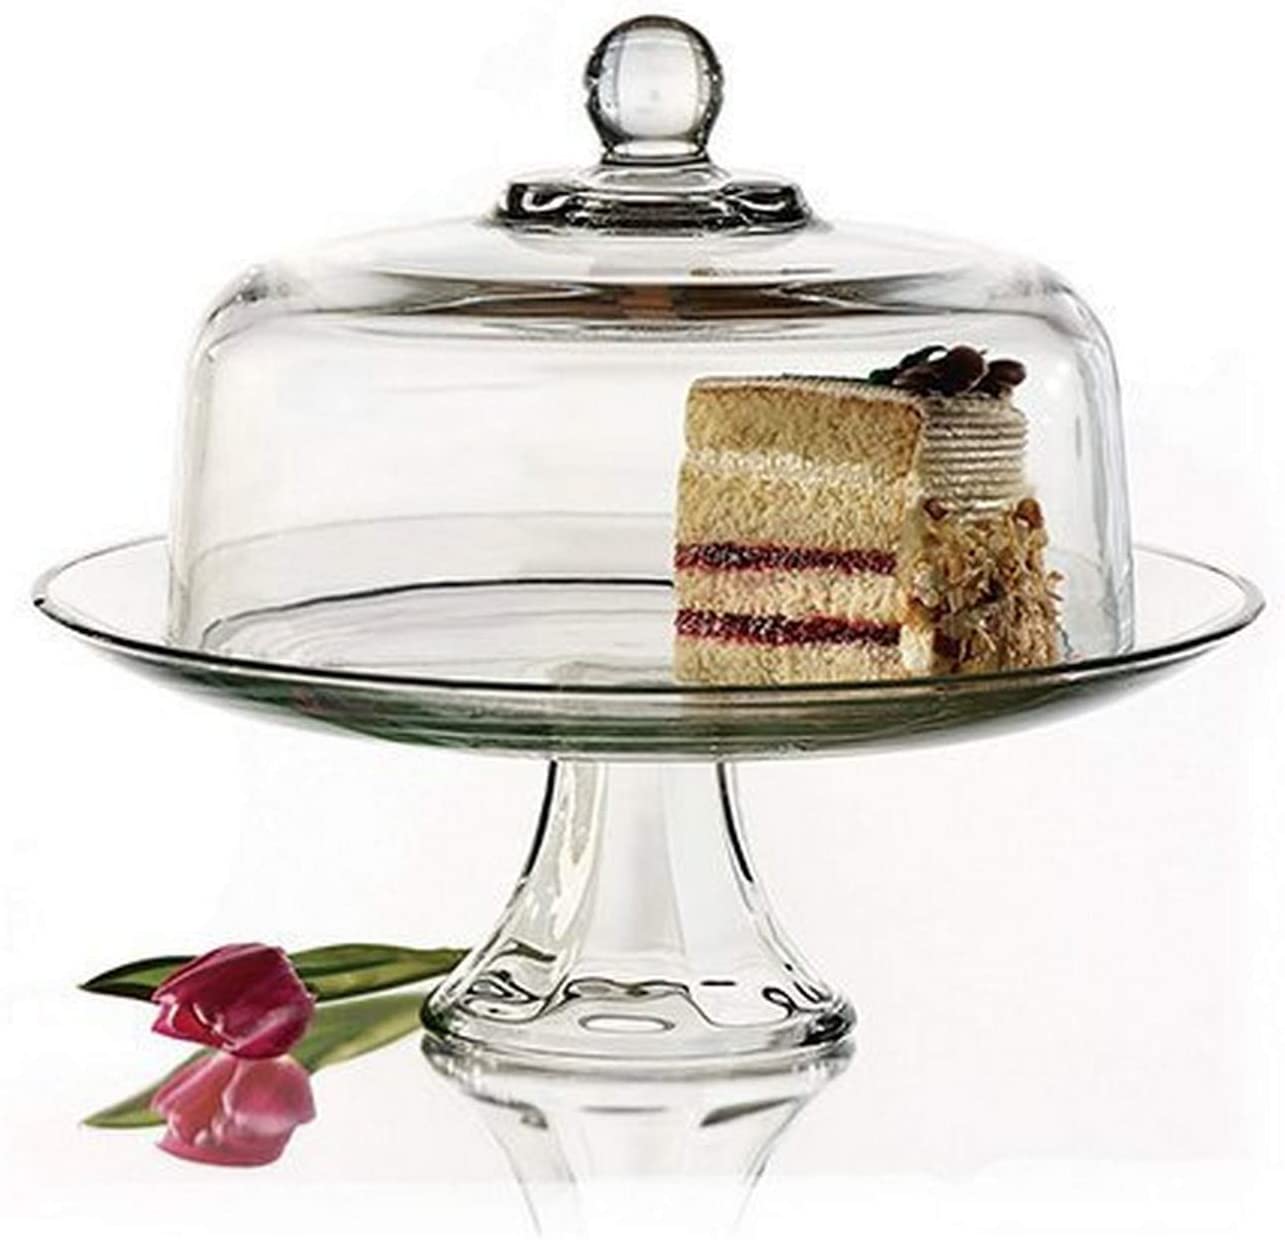 Anchor Hocking Presence Dome Cake Stand